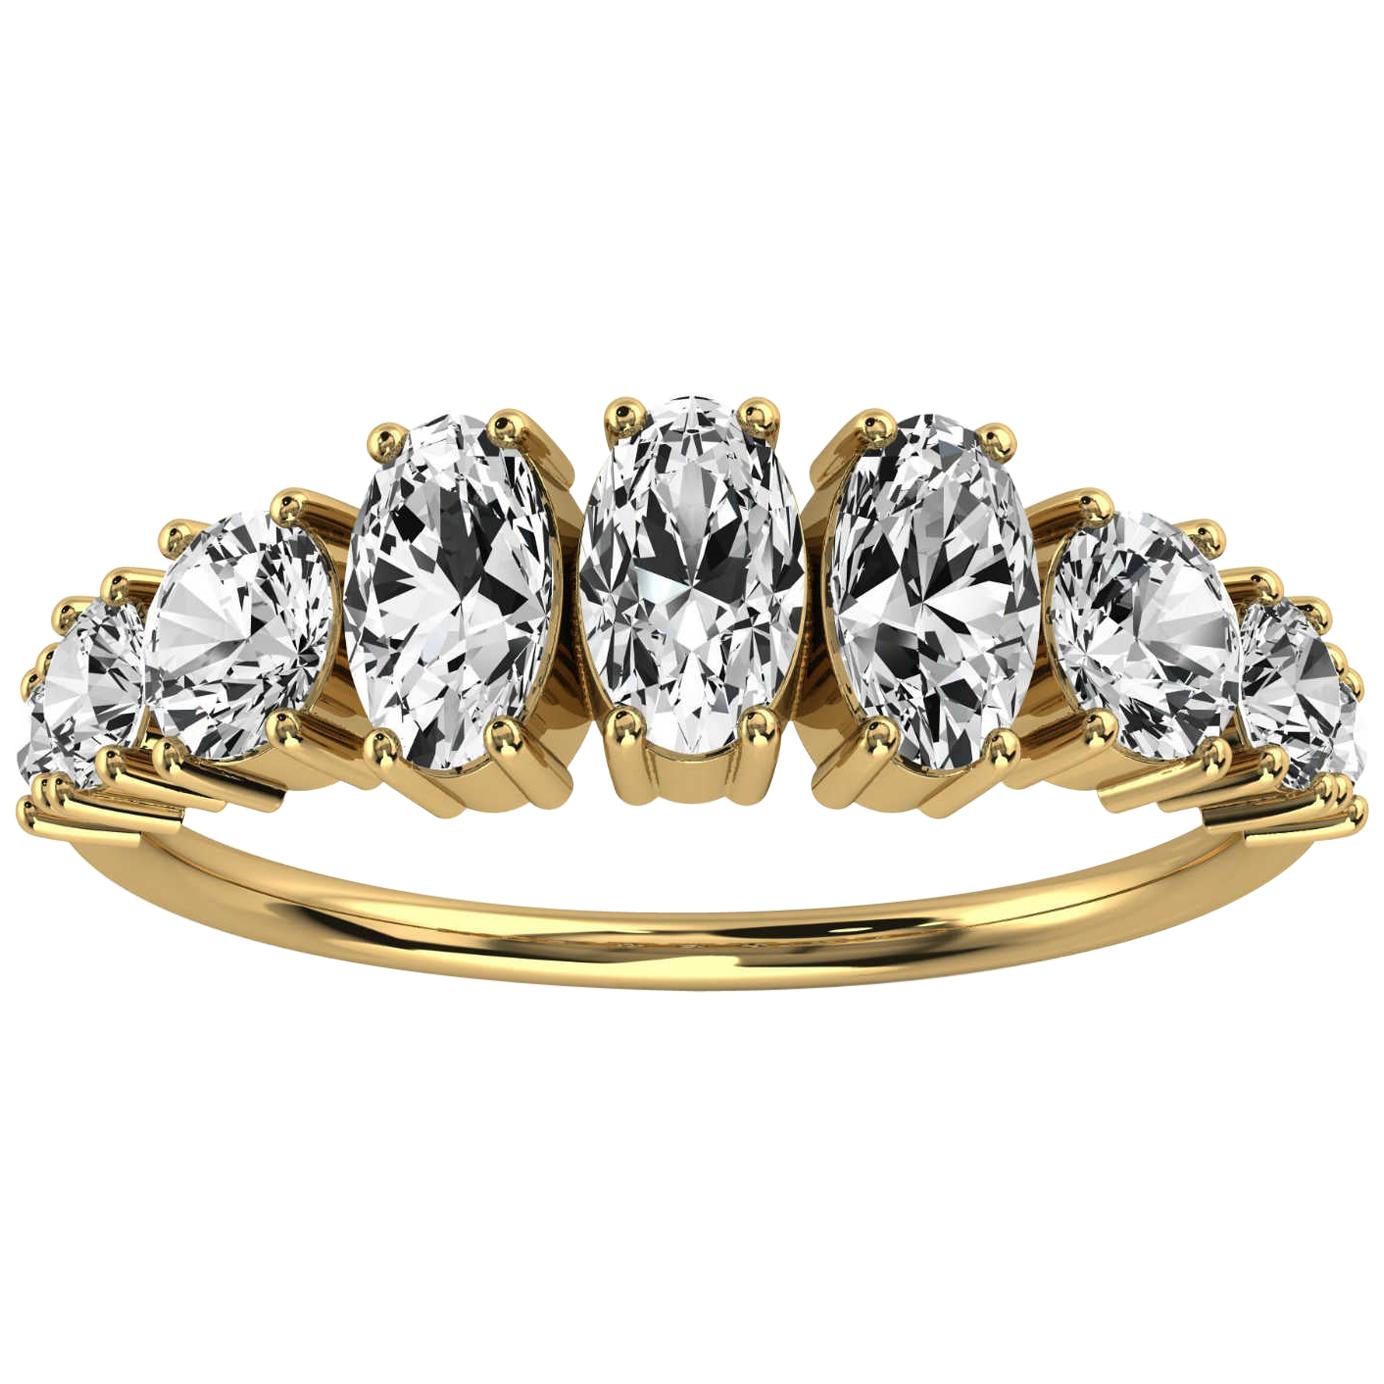 18k Yellow Gold Kym Oval and Round Organic Design Diamond Ring '1 1/4 Ct. Tw' For Sale